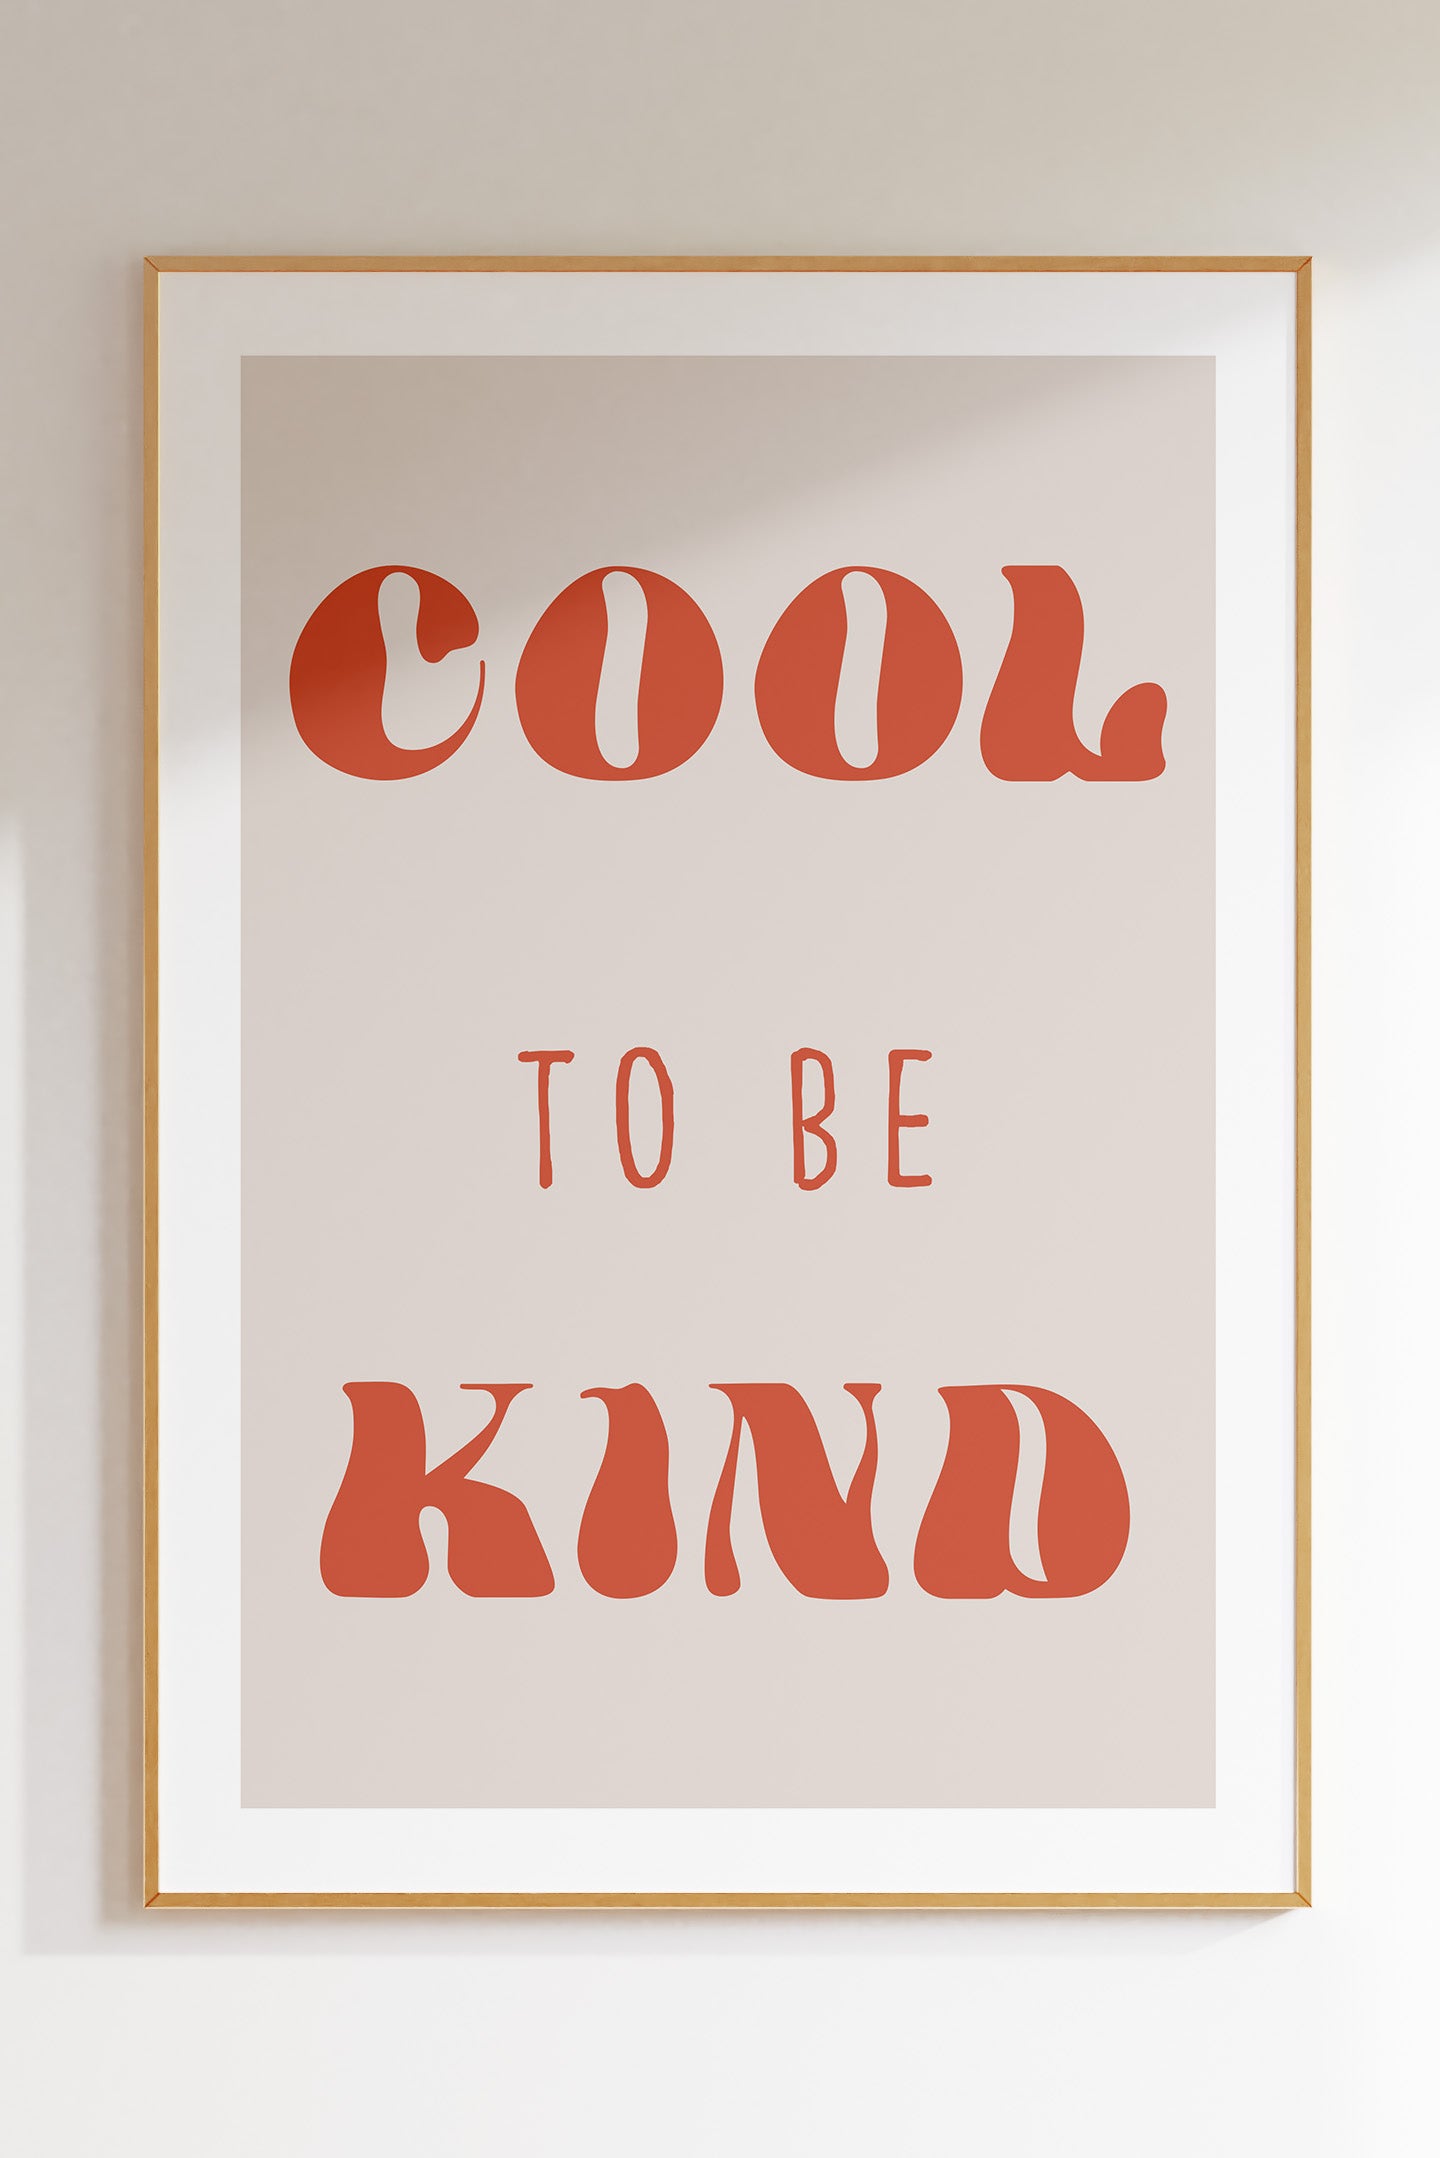 Cool to be Kind